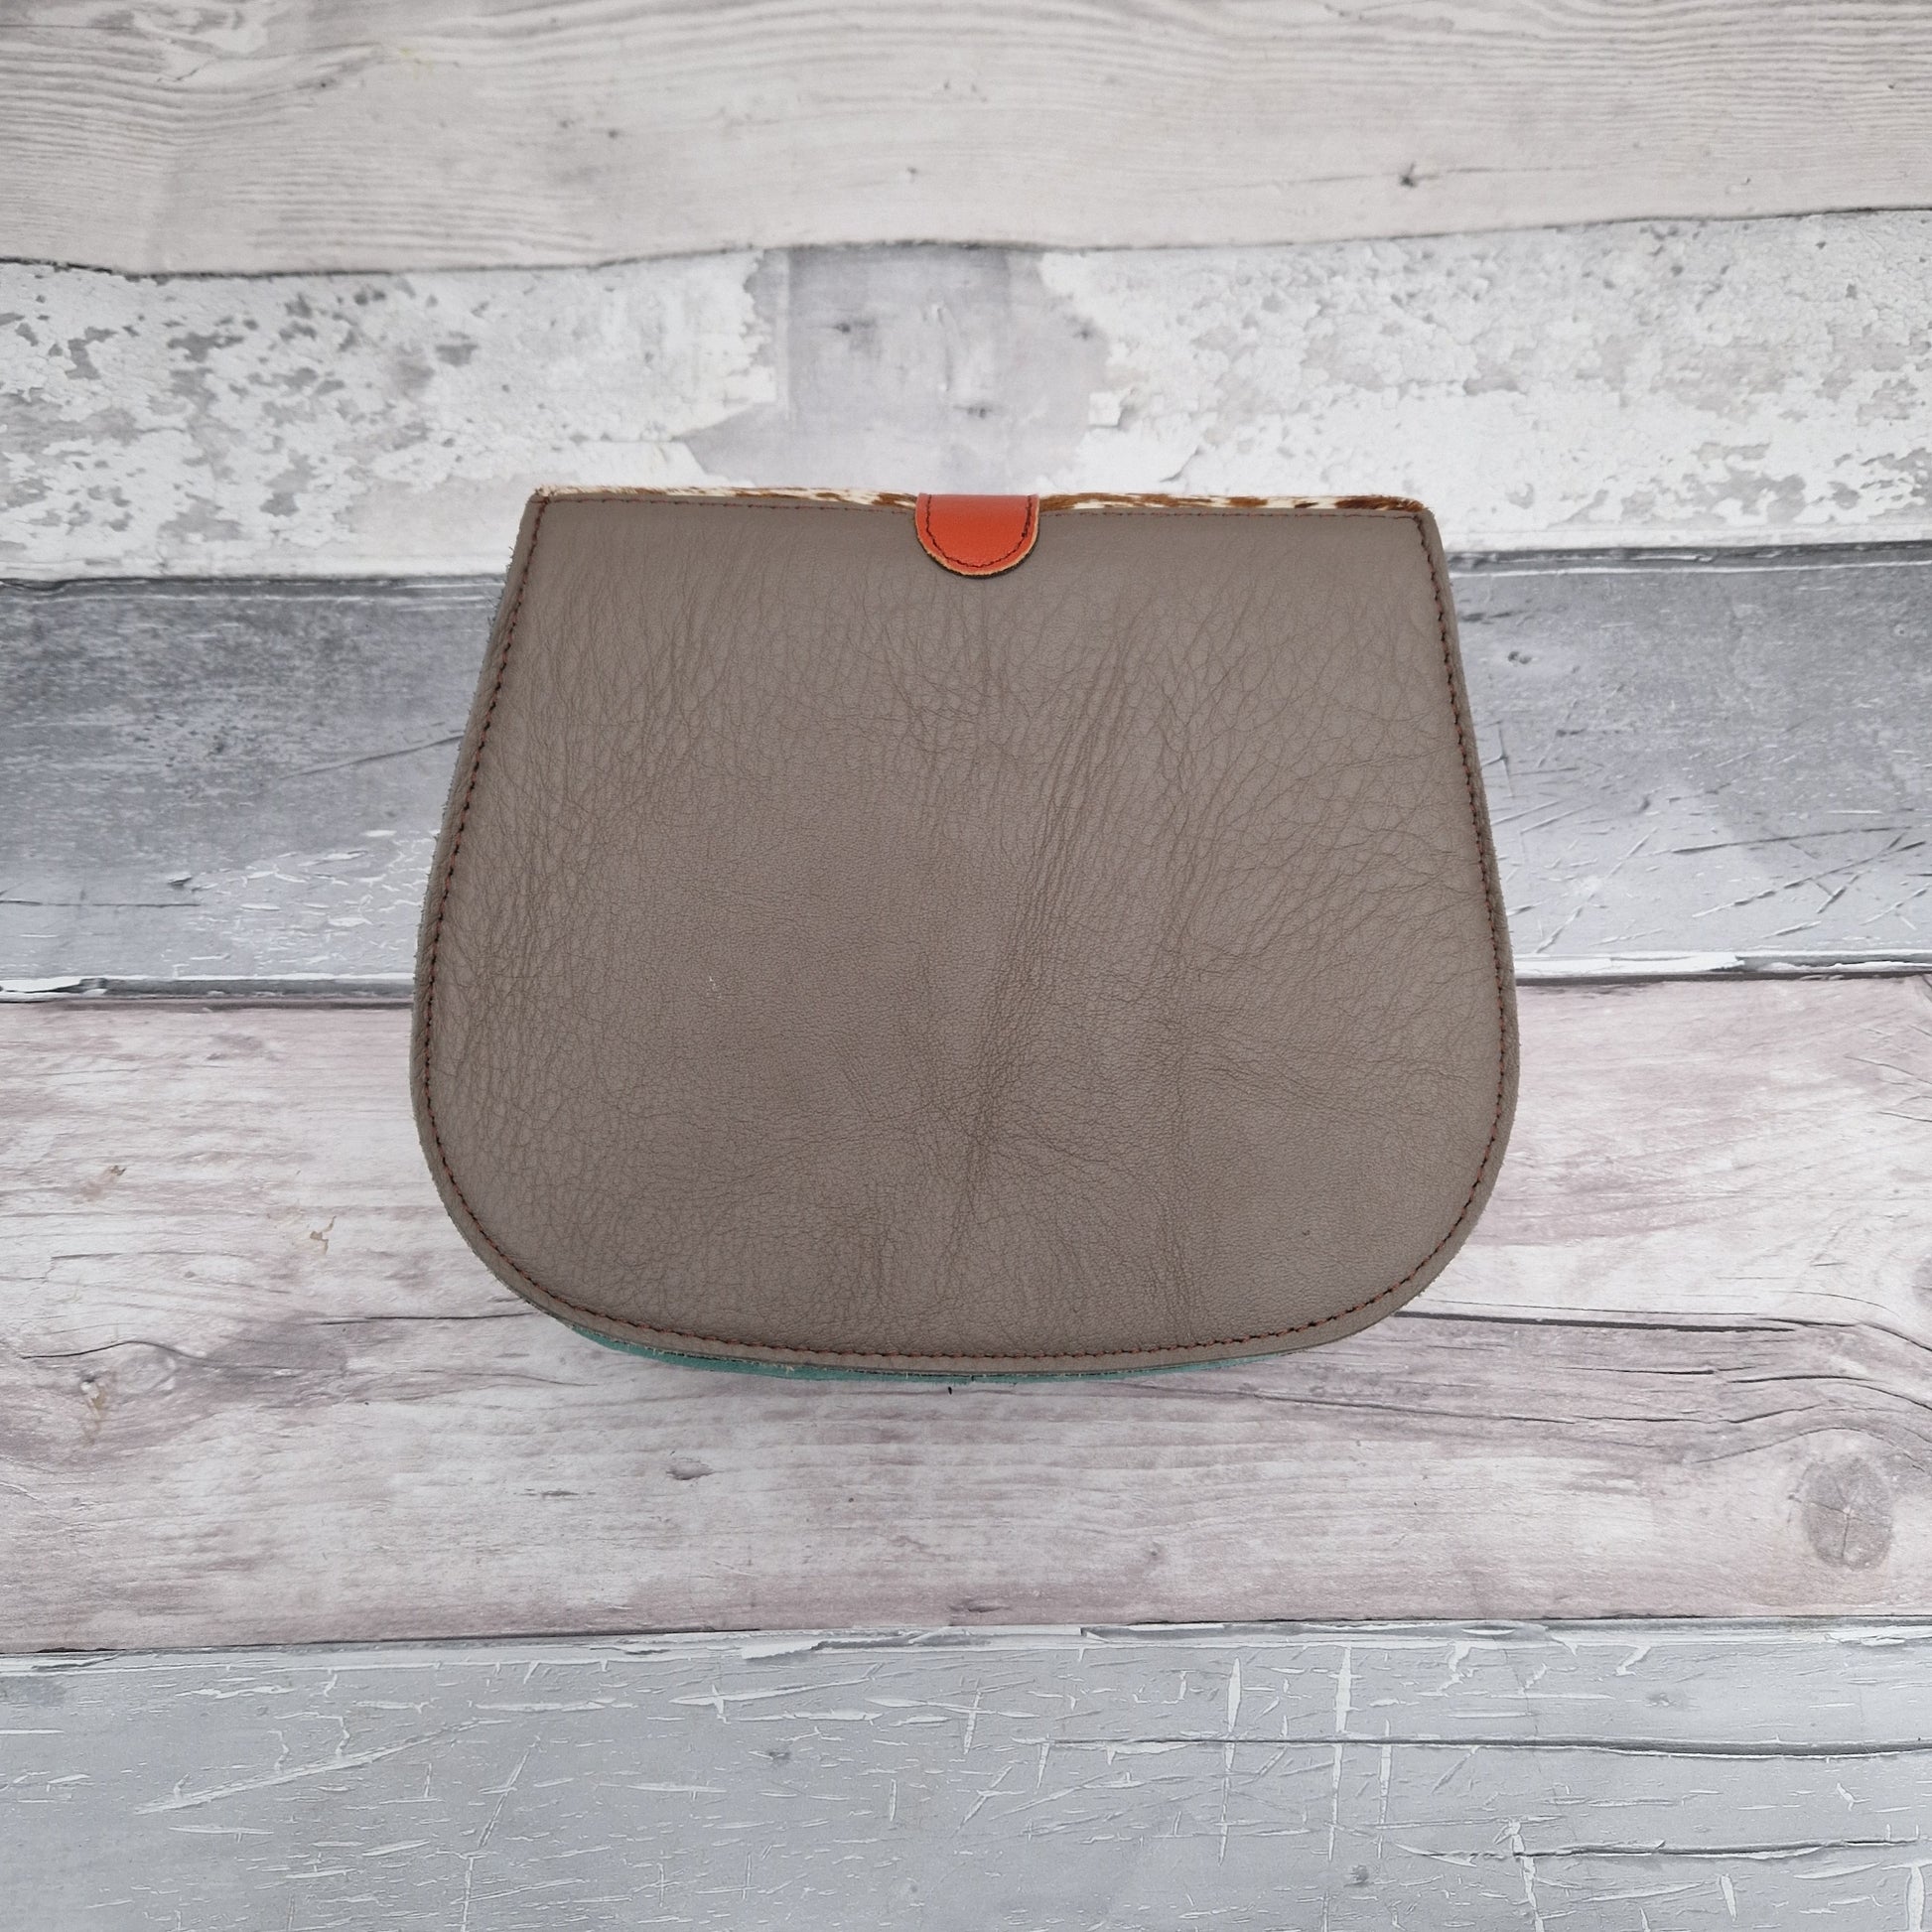 Bag made entirely from leather off cuts in a rainbow of colours with a textured panel in cow print.